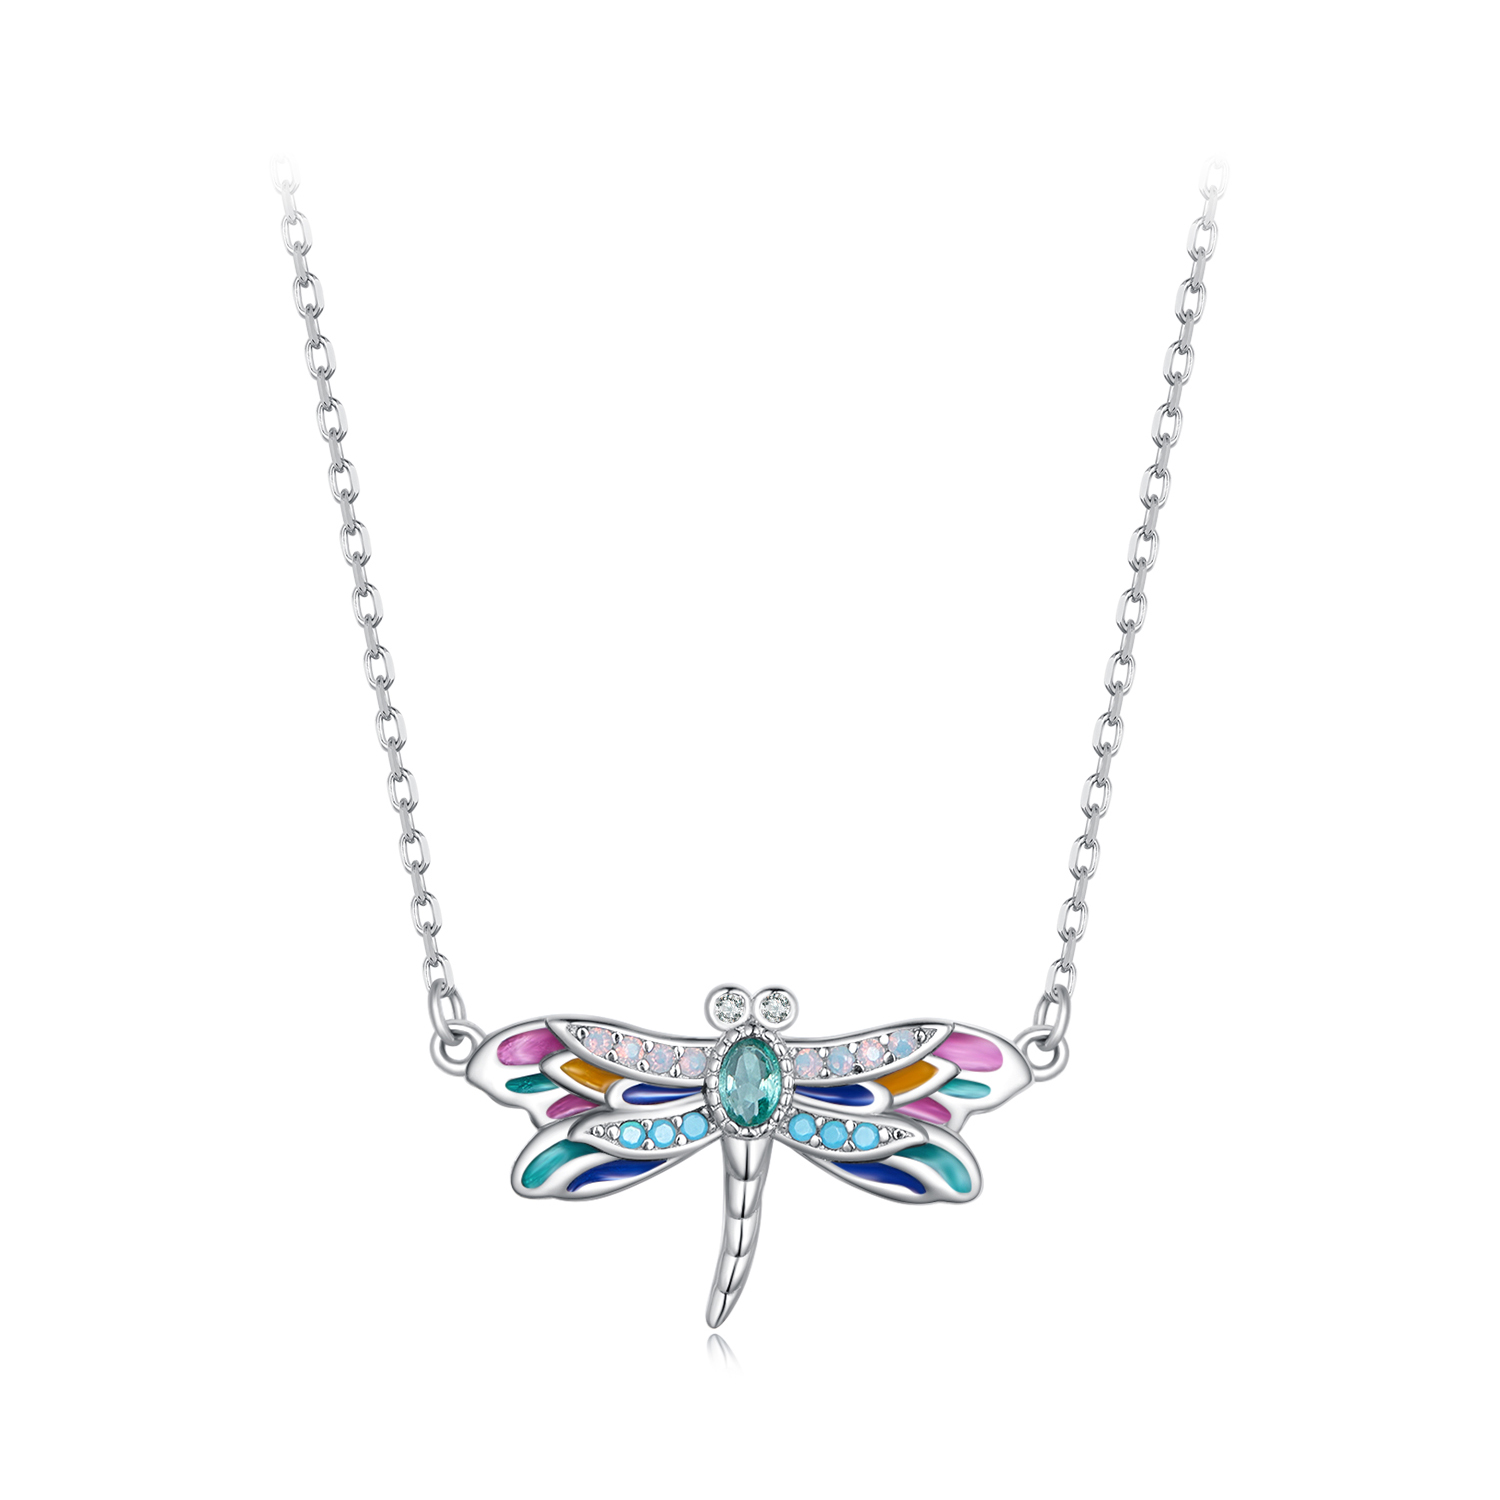 exquisite dragonfly necklace in the pandora style bsn348